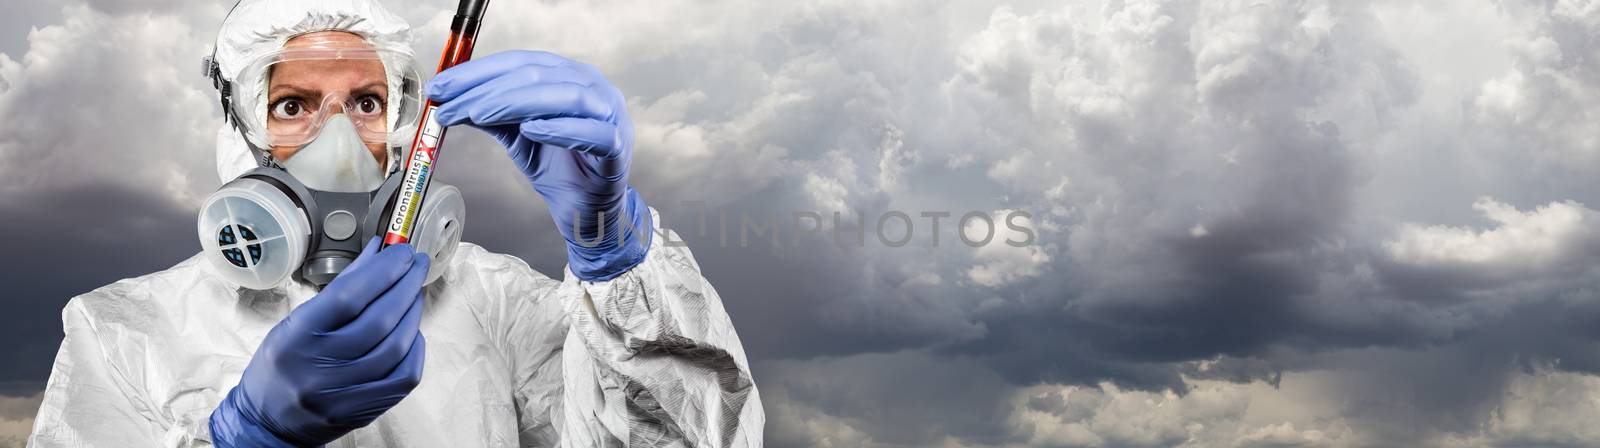 Female Doctor or Nurse In Hazmat Gear Holding Positive Coronavirus Test Tube Cloudy Sky Banner. by Feverpitched